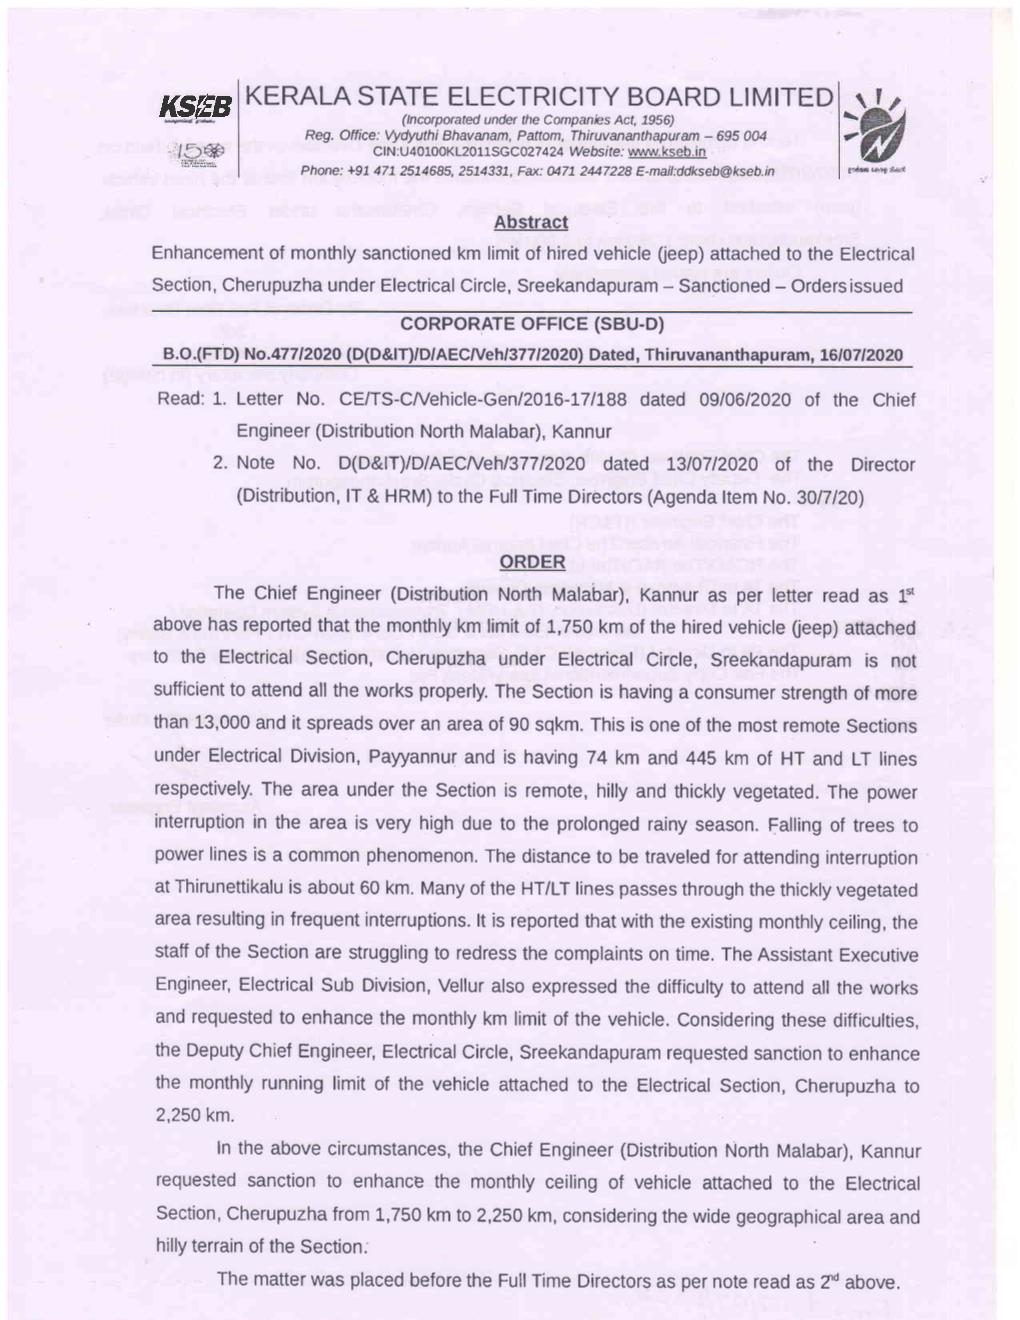 KERALA STATE ELECTRICITY BOARD LIMITED KSEB (Lncorporated Under the Companies Act, 7956) Reg